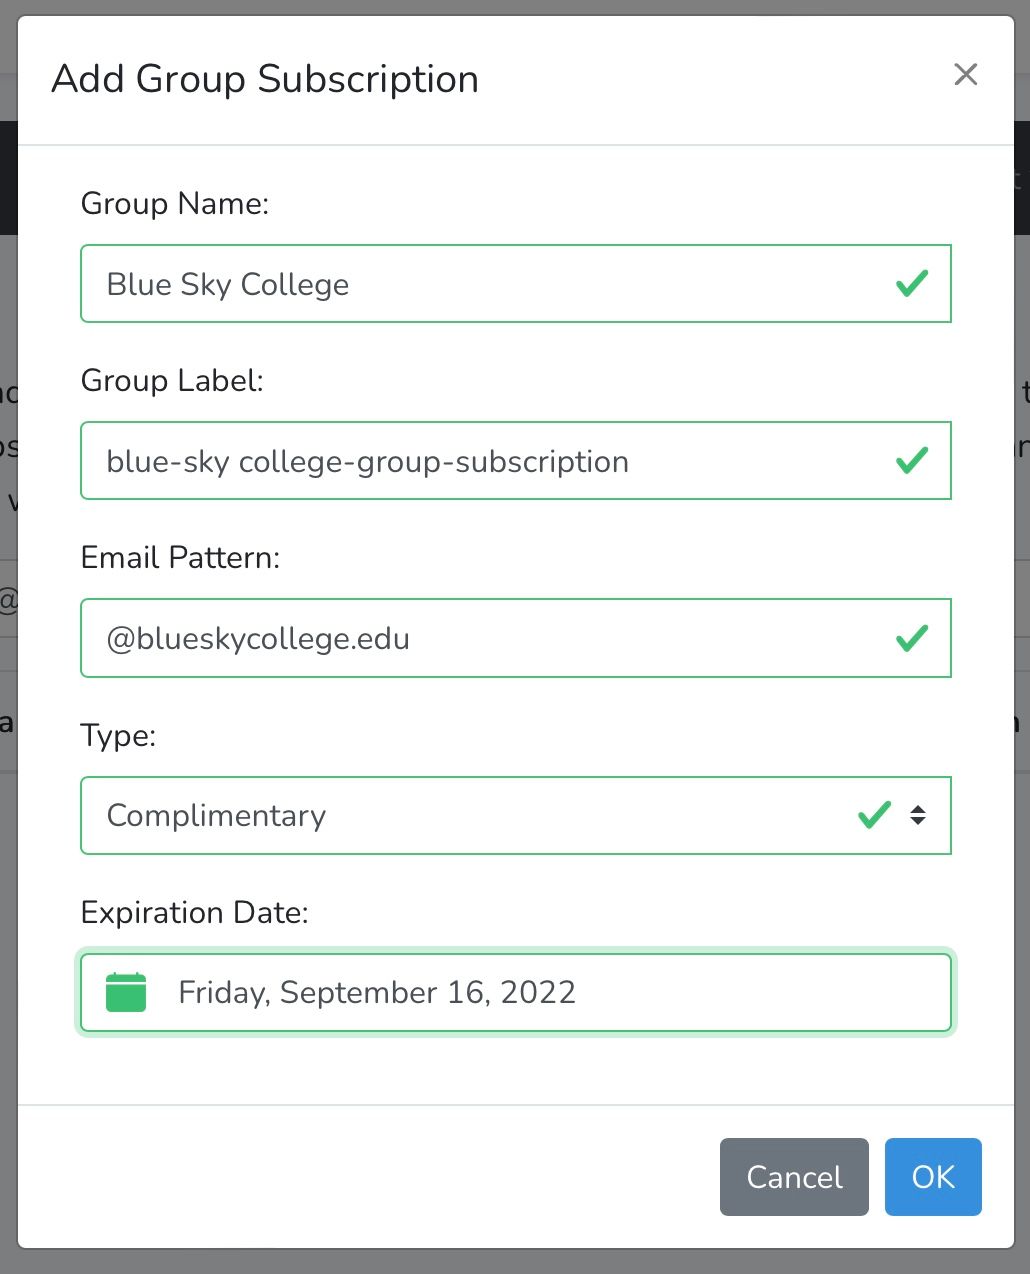 Screenshot of form to add new group subscription